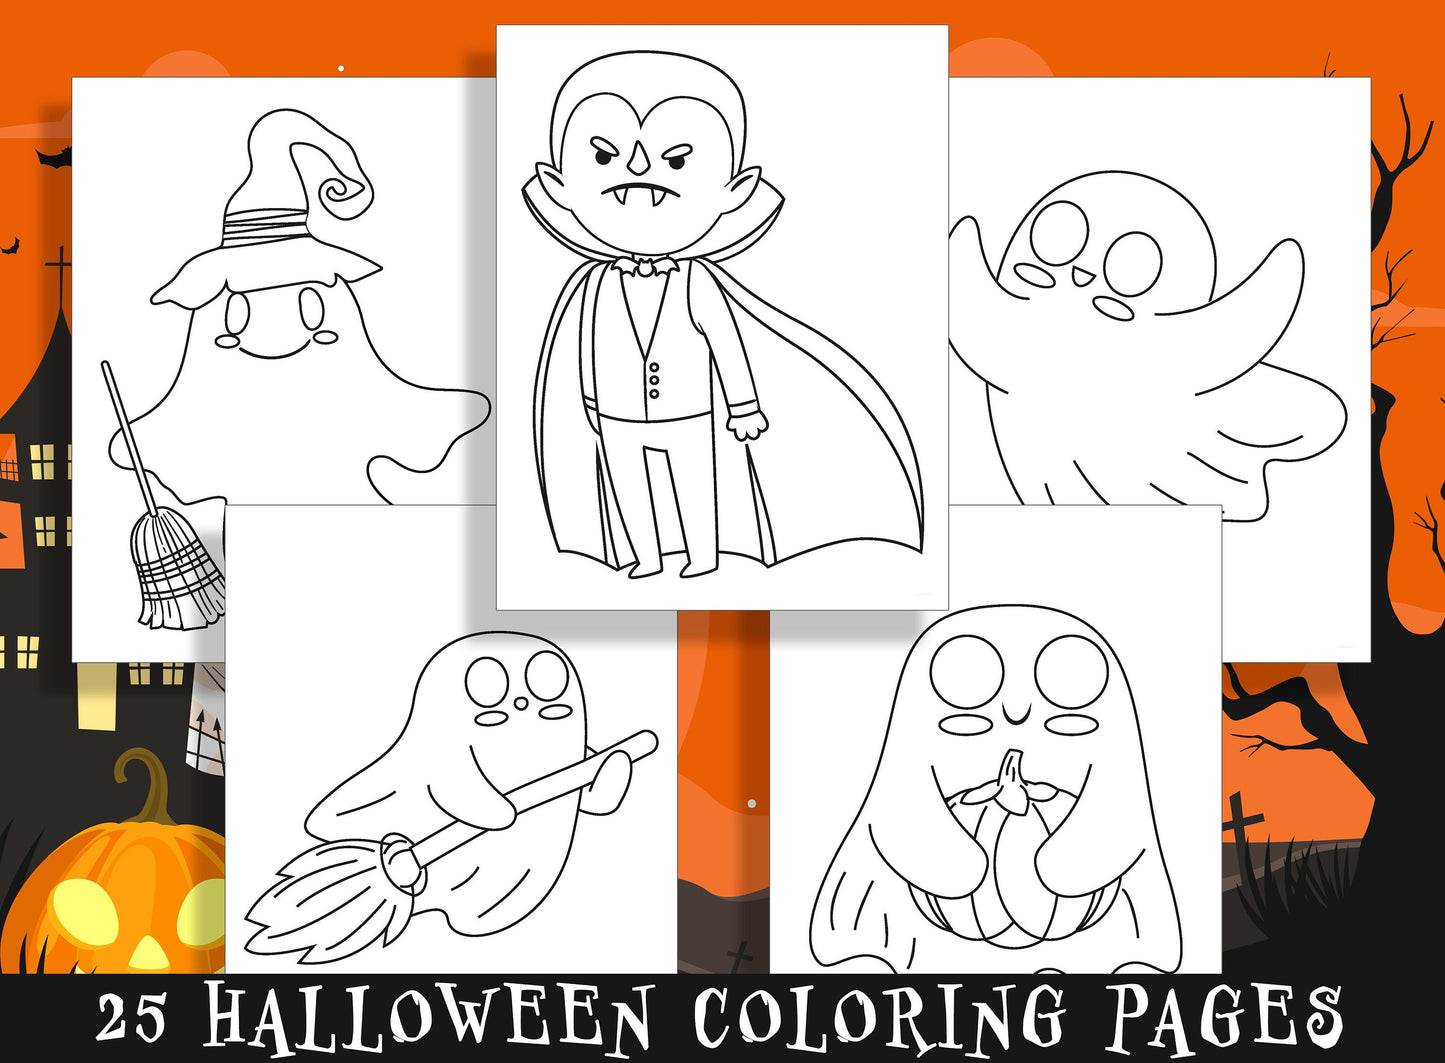 Get Spooky with these Adorable Halloween Coloring Pages for Kindergarten and Preschoolers - 25 Fun-filled Pages!, PDF File, Instant Download